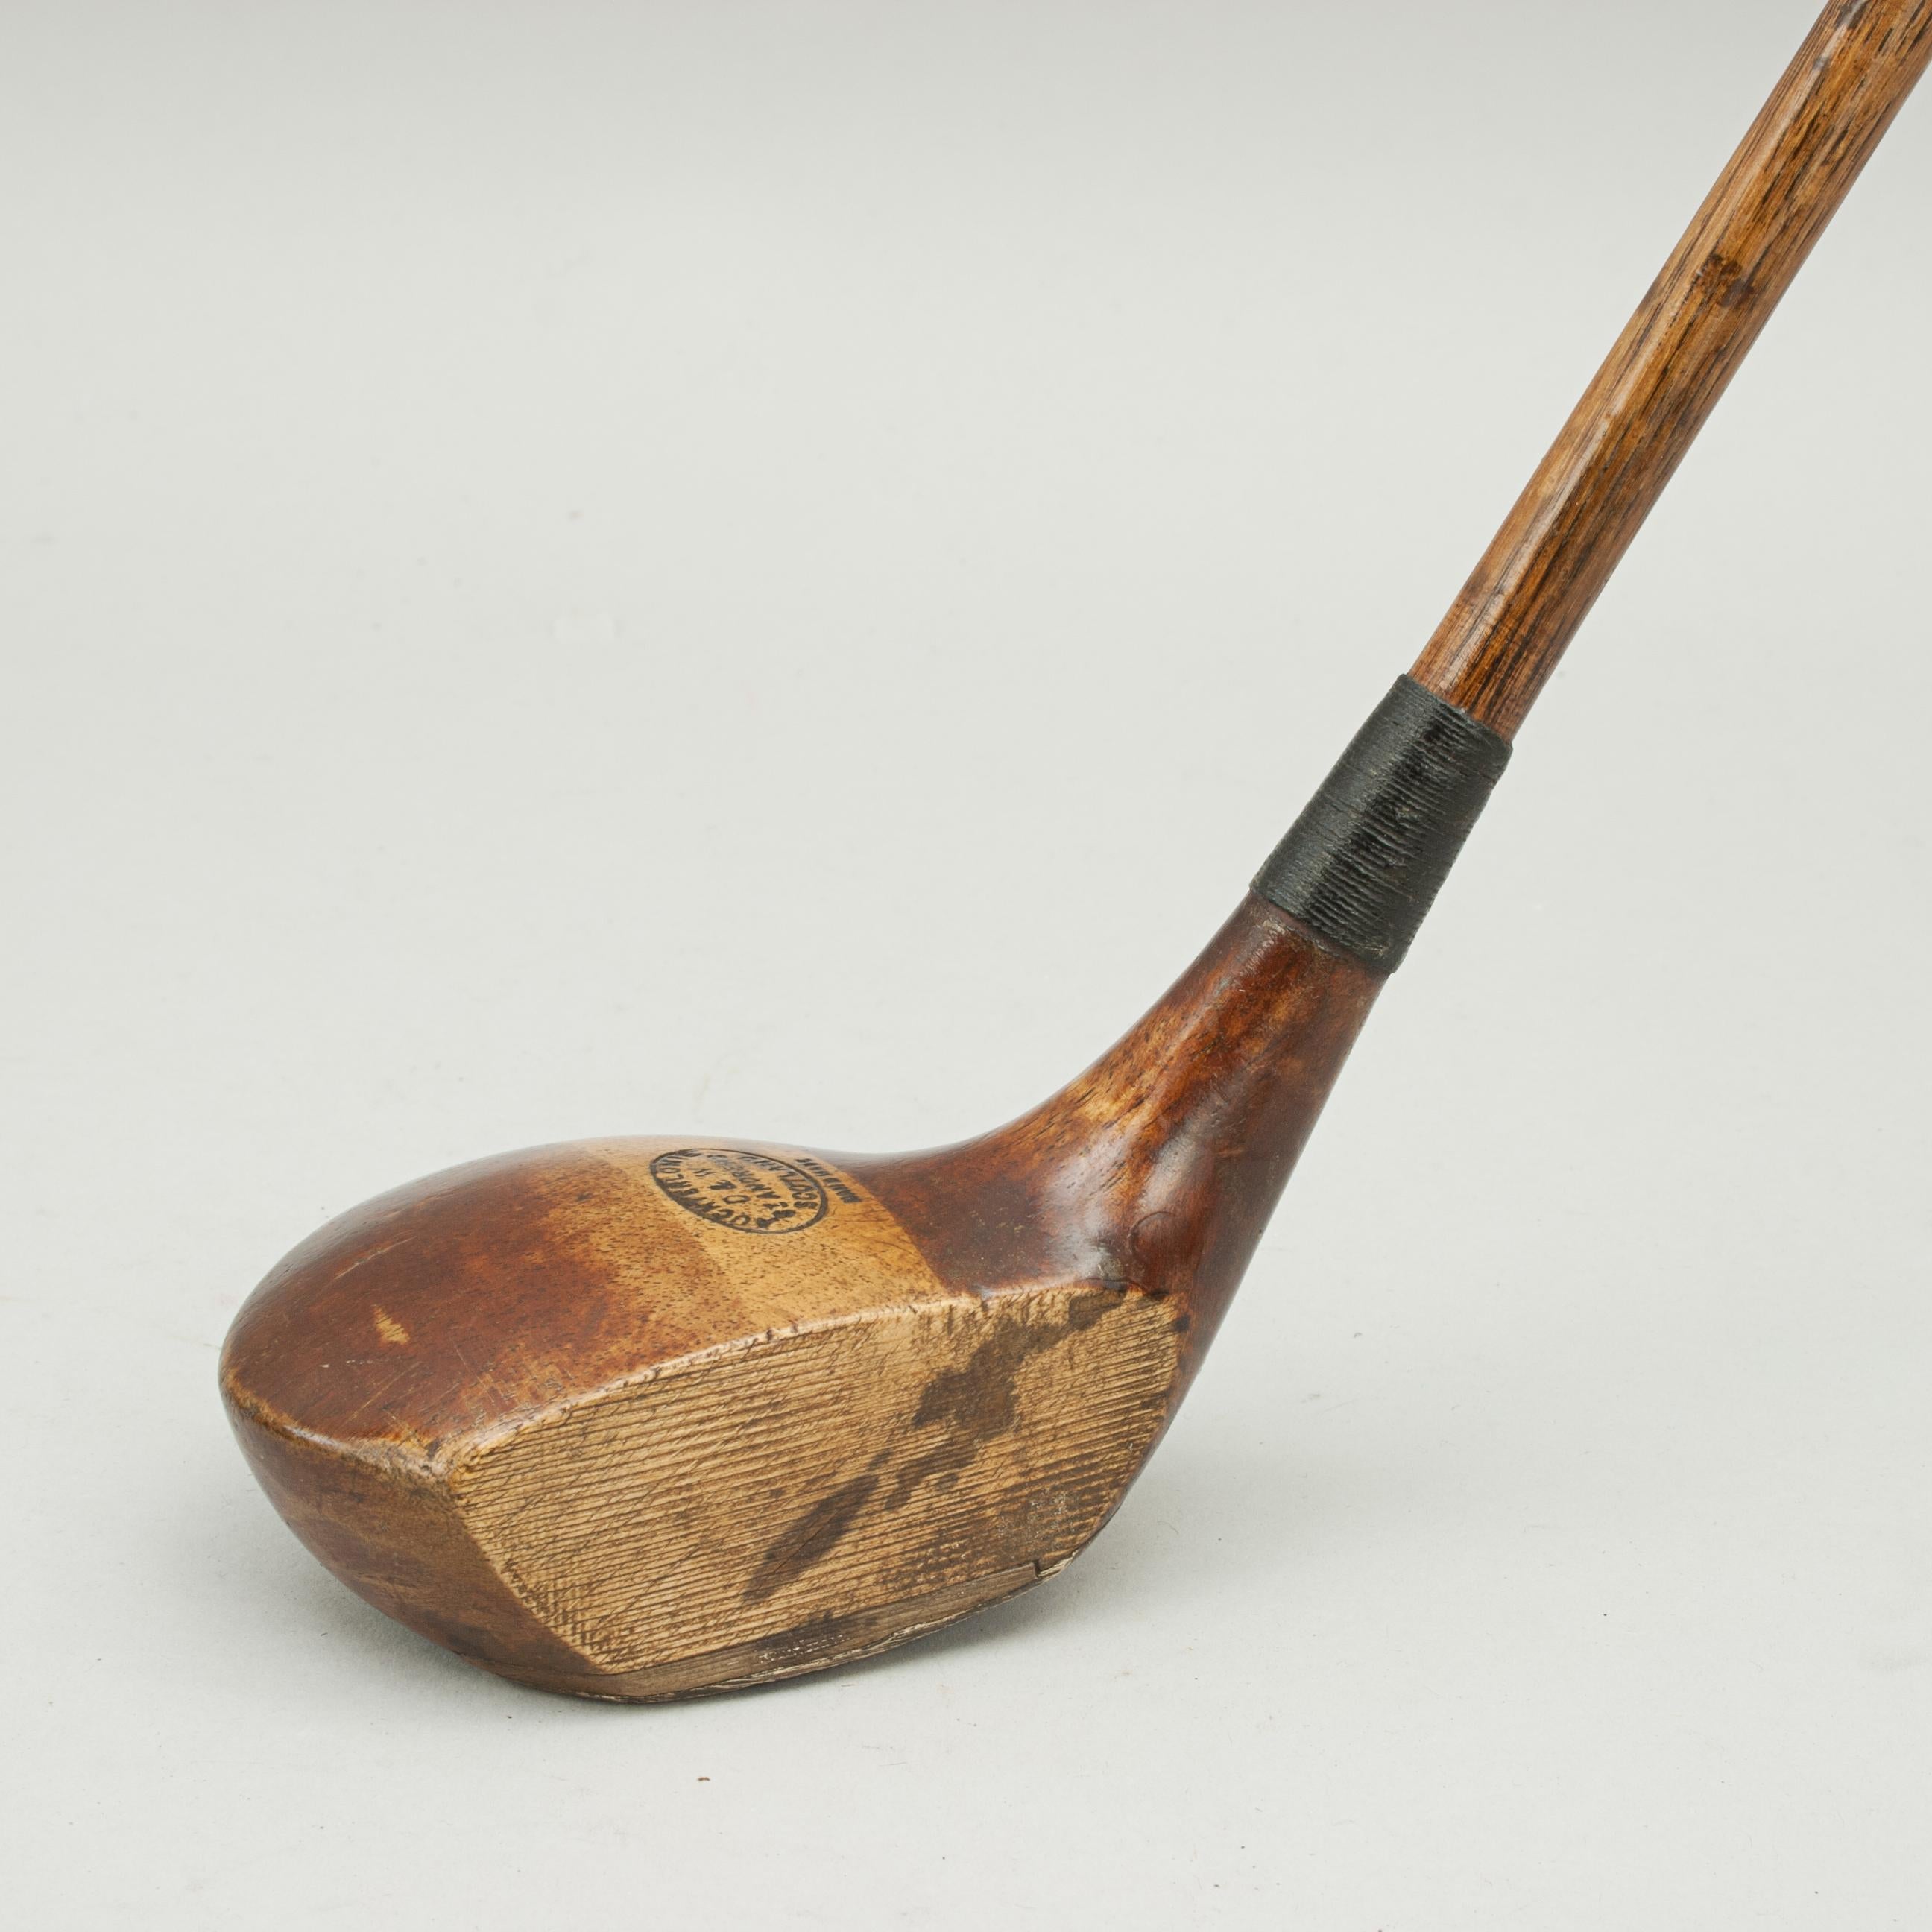 Vintage Golf Club, Hickory Shafted by Auchterlonie, St Andrews 4